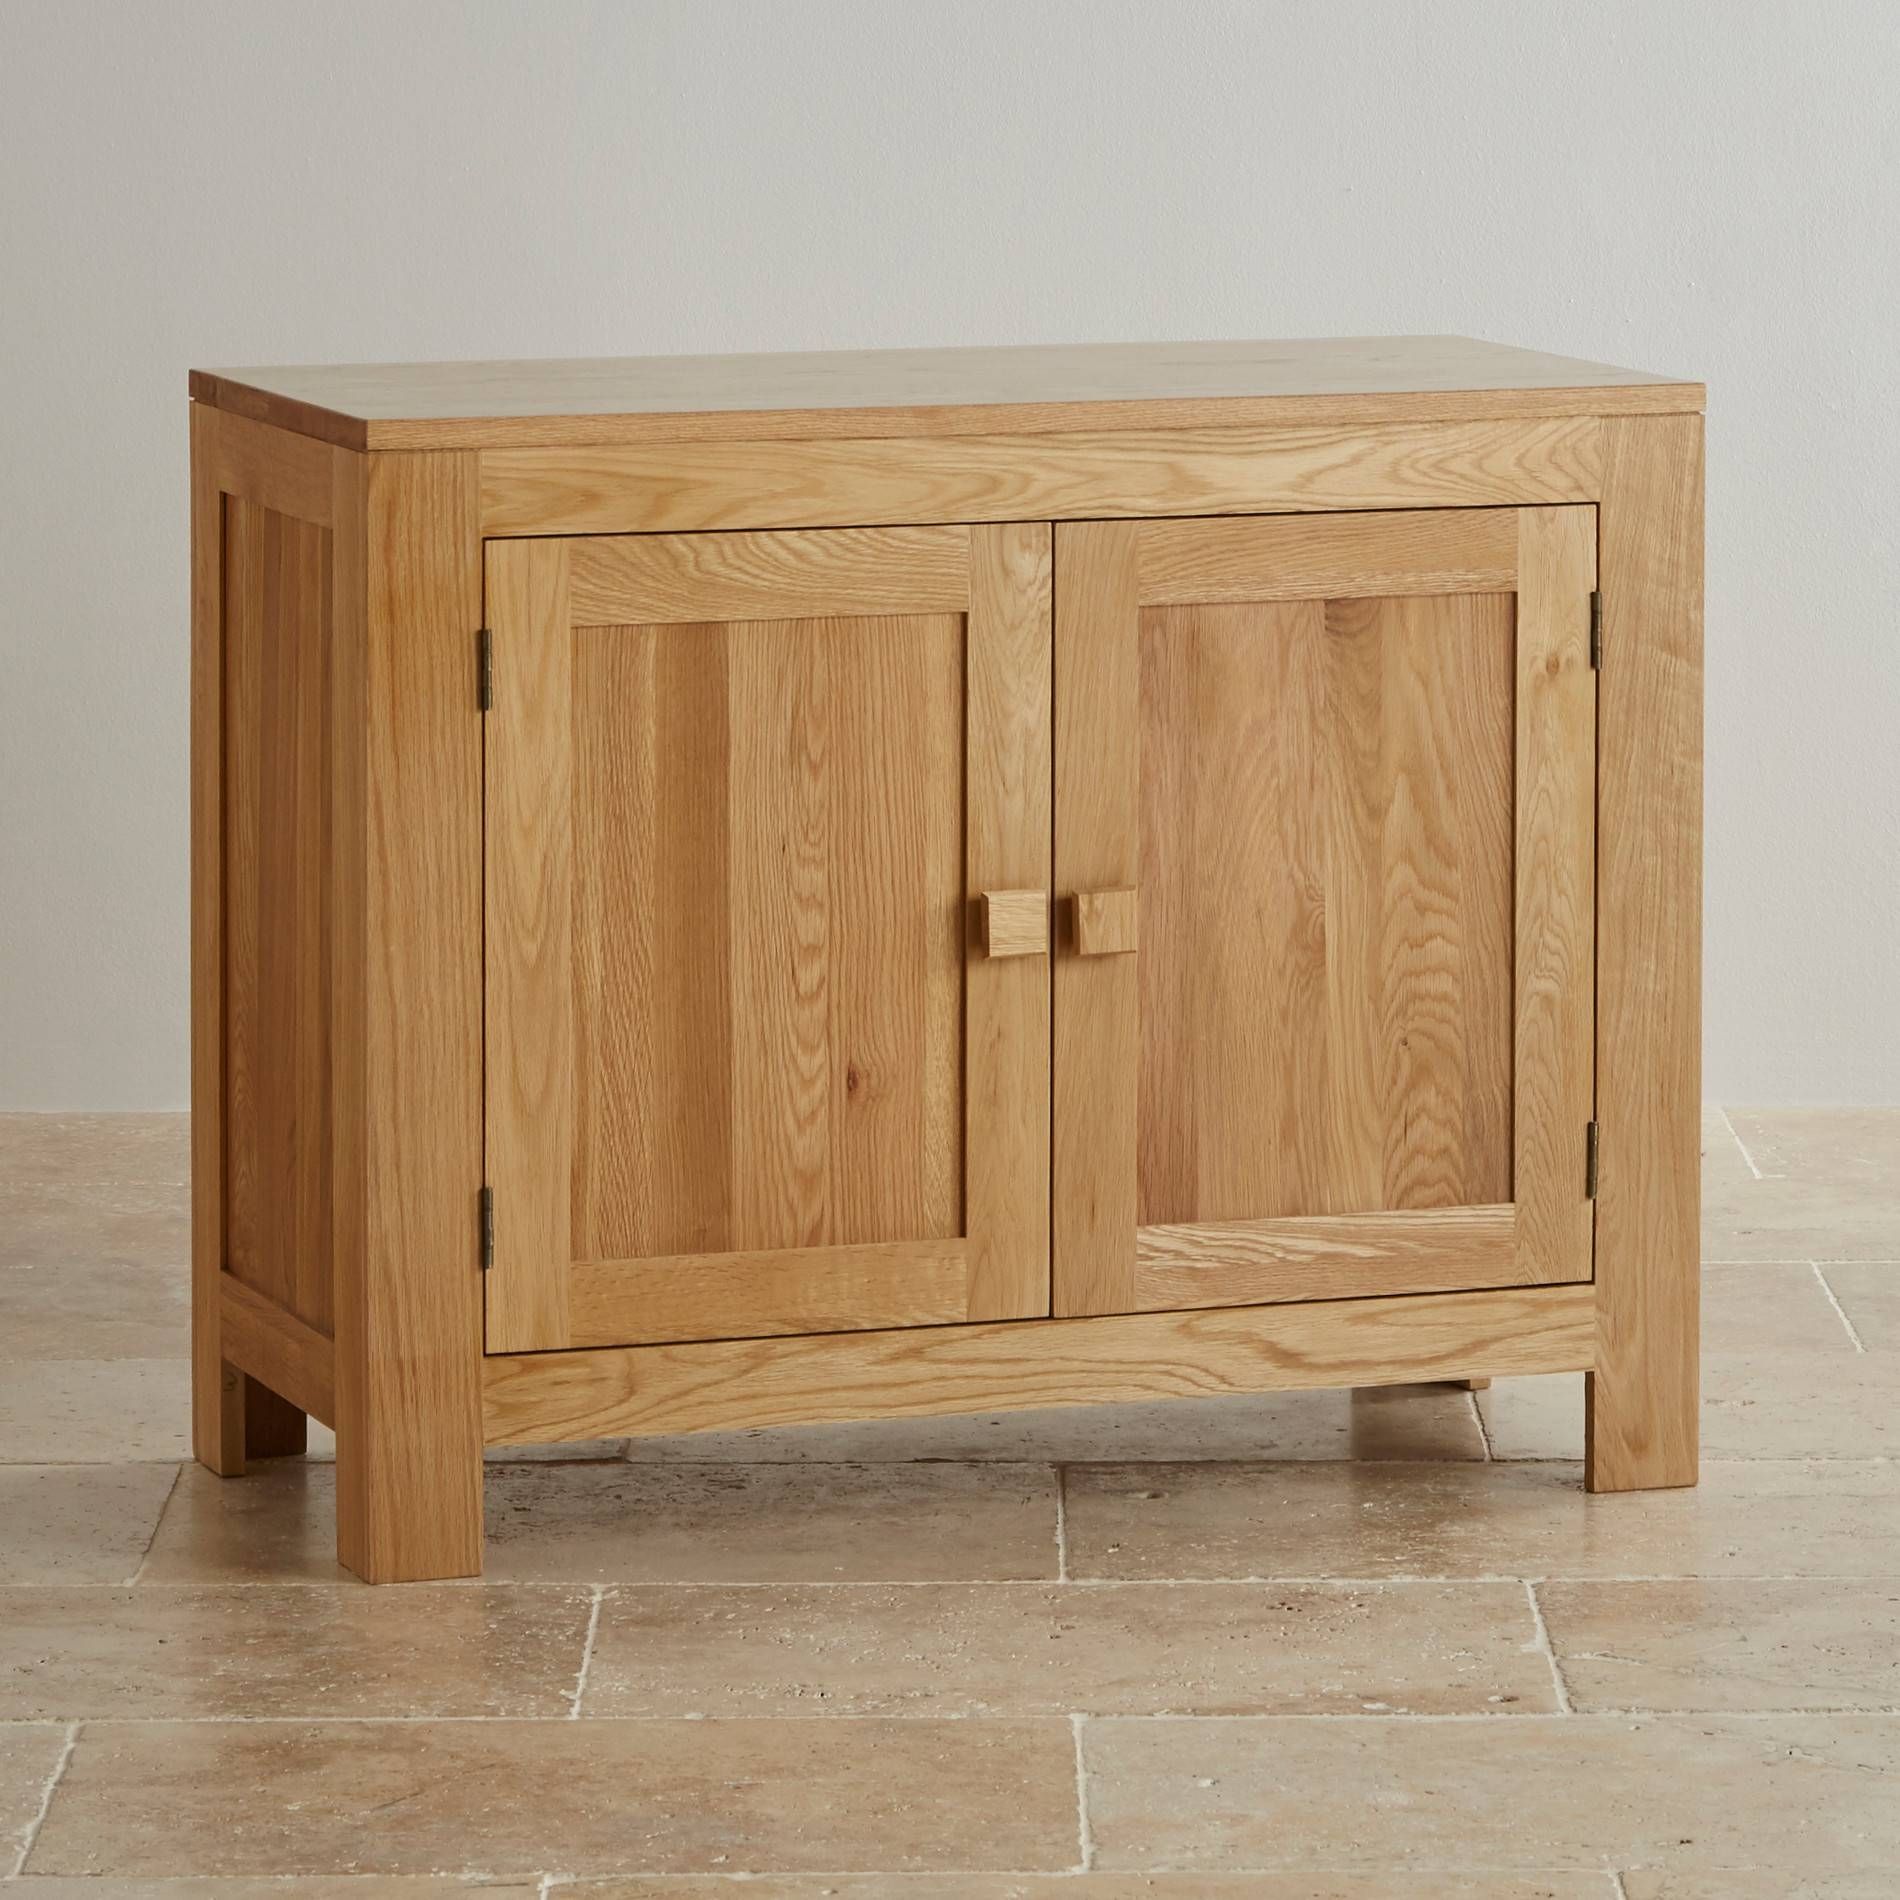 Oakdale Natural Solid Oak Small Sideboard | Oak Furniture Land In Small Wooden Sideboards (View 7 of 15)